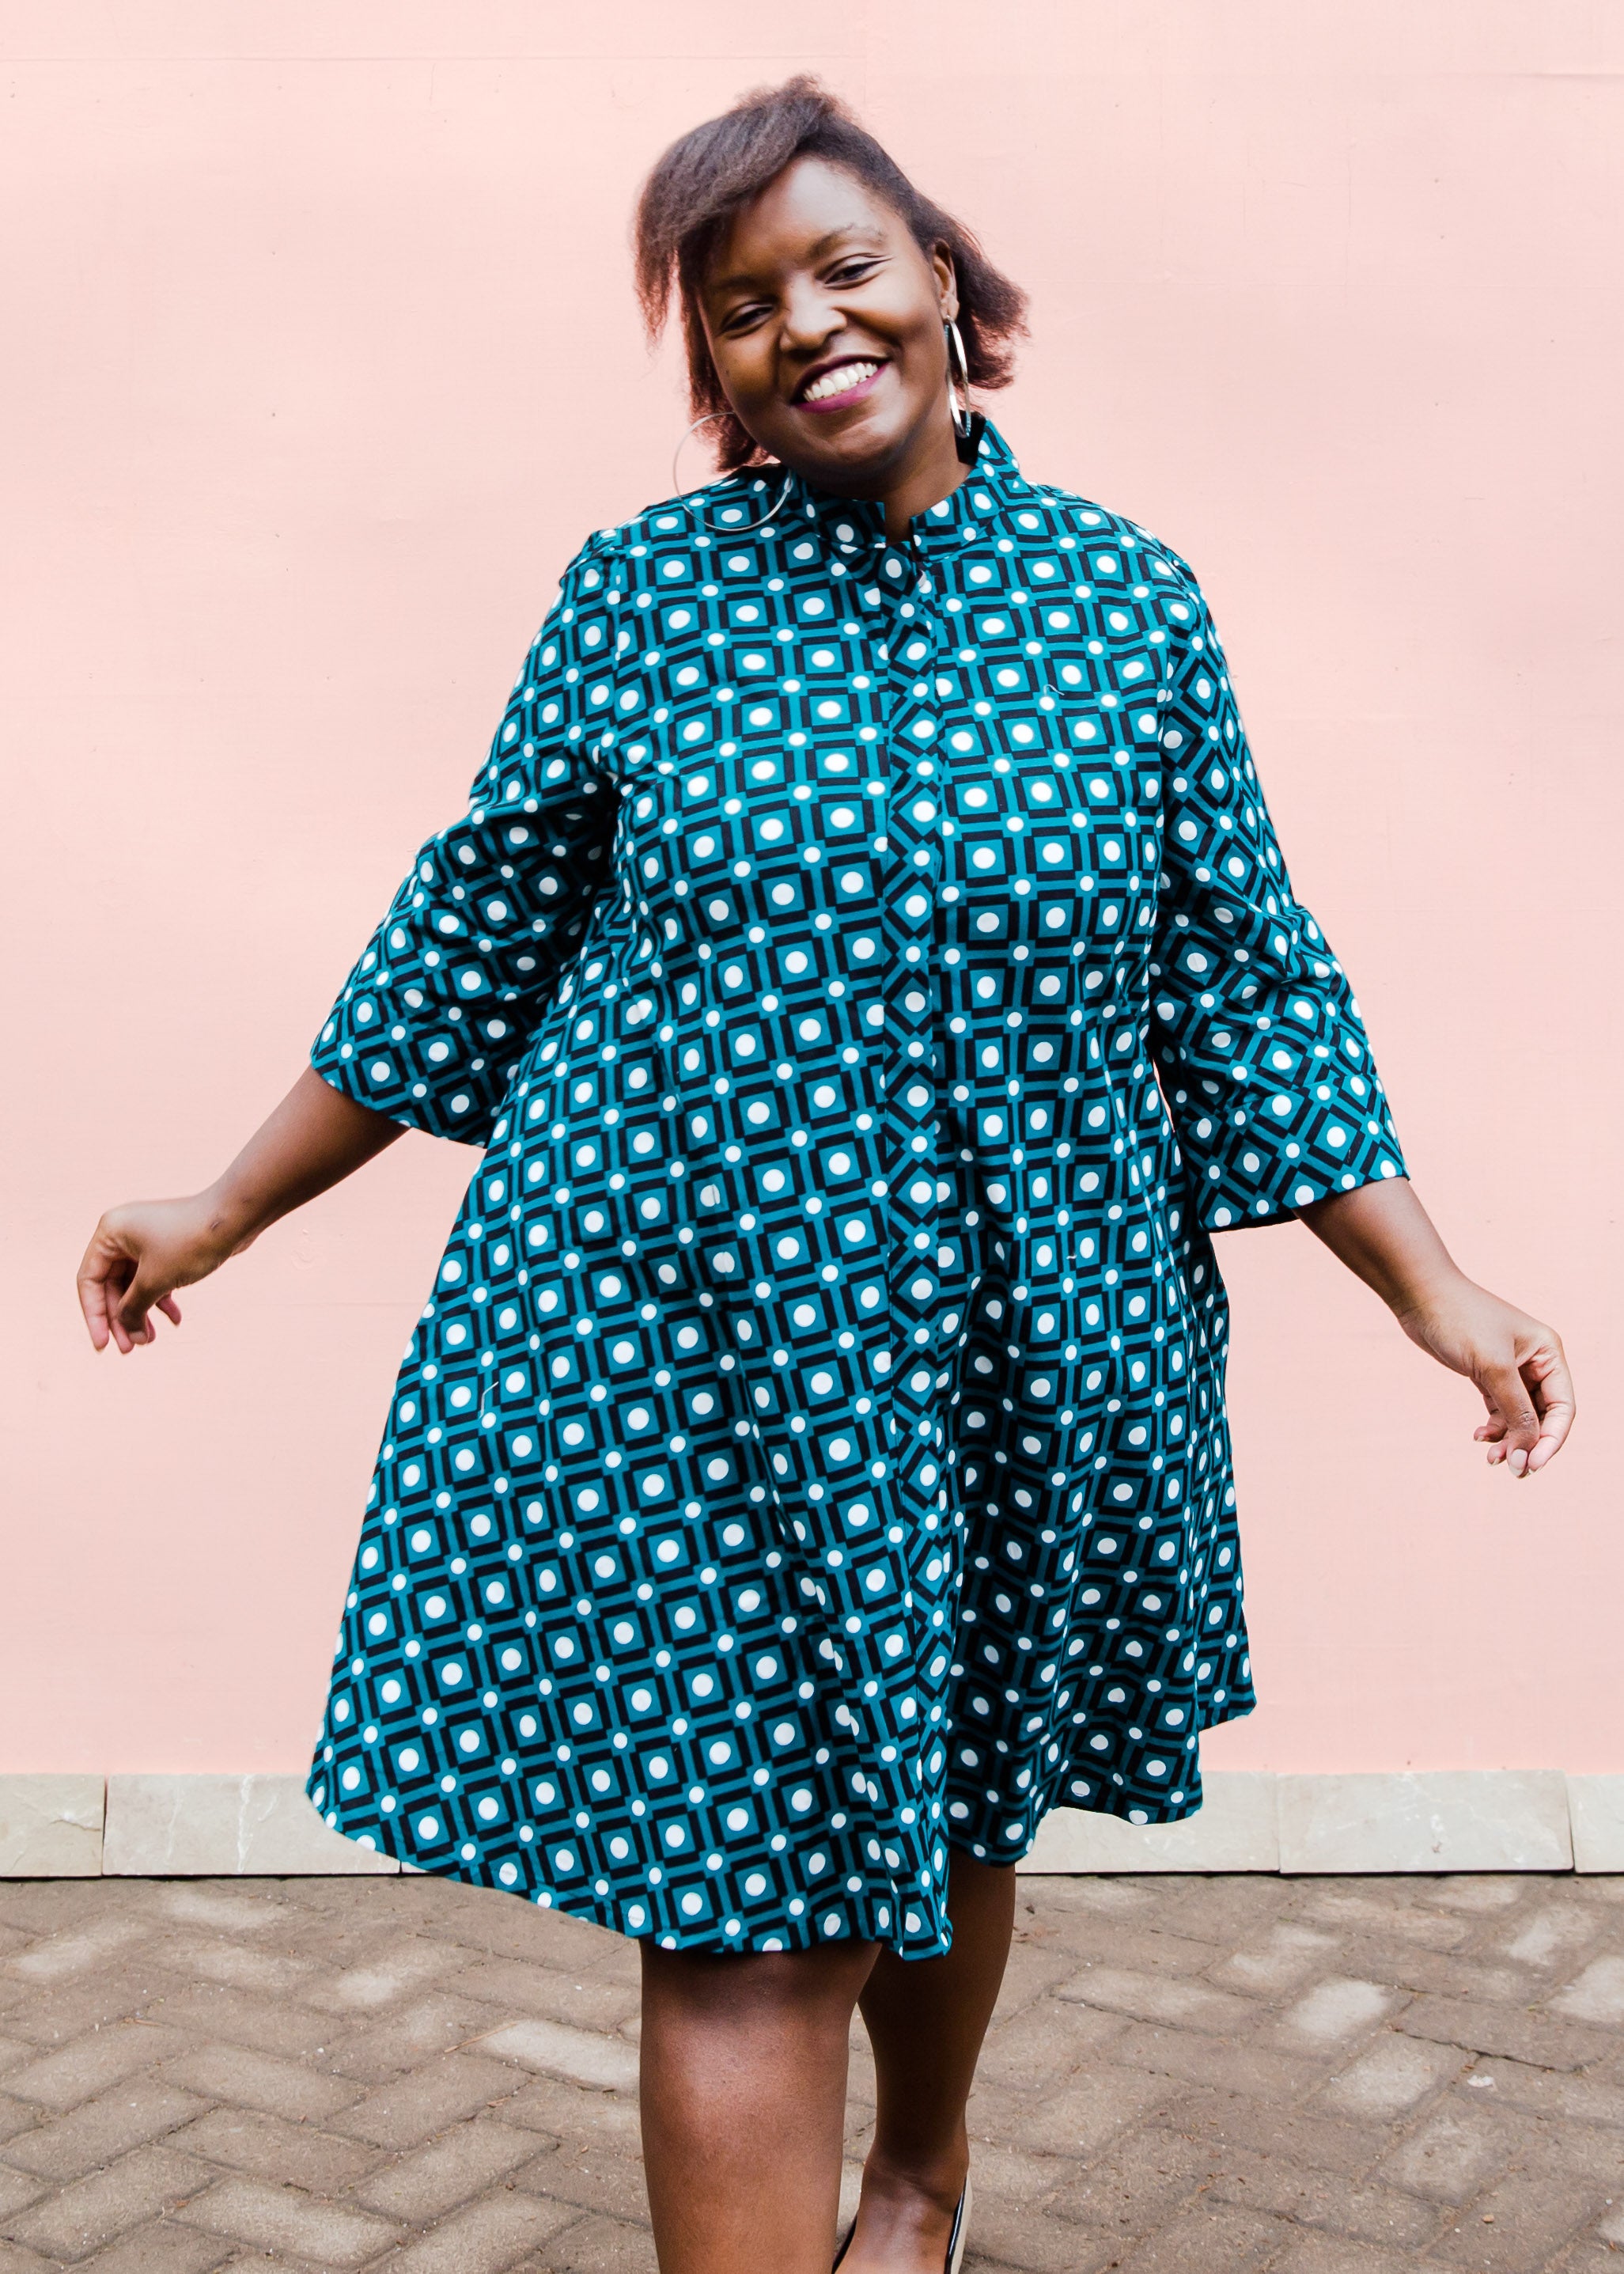 Teal dress with white dots